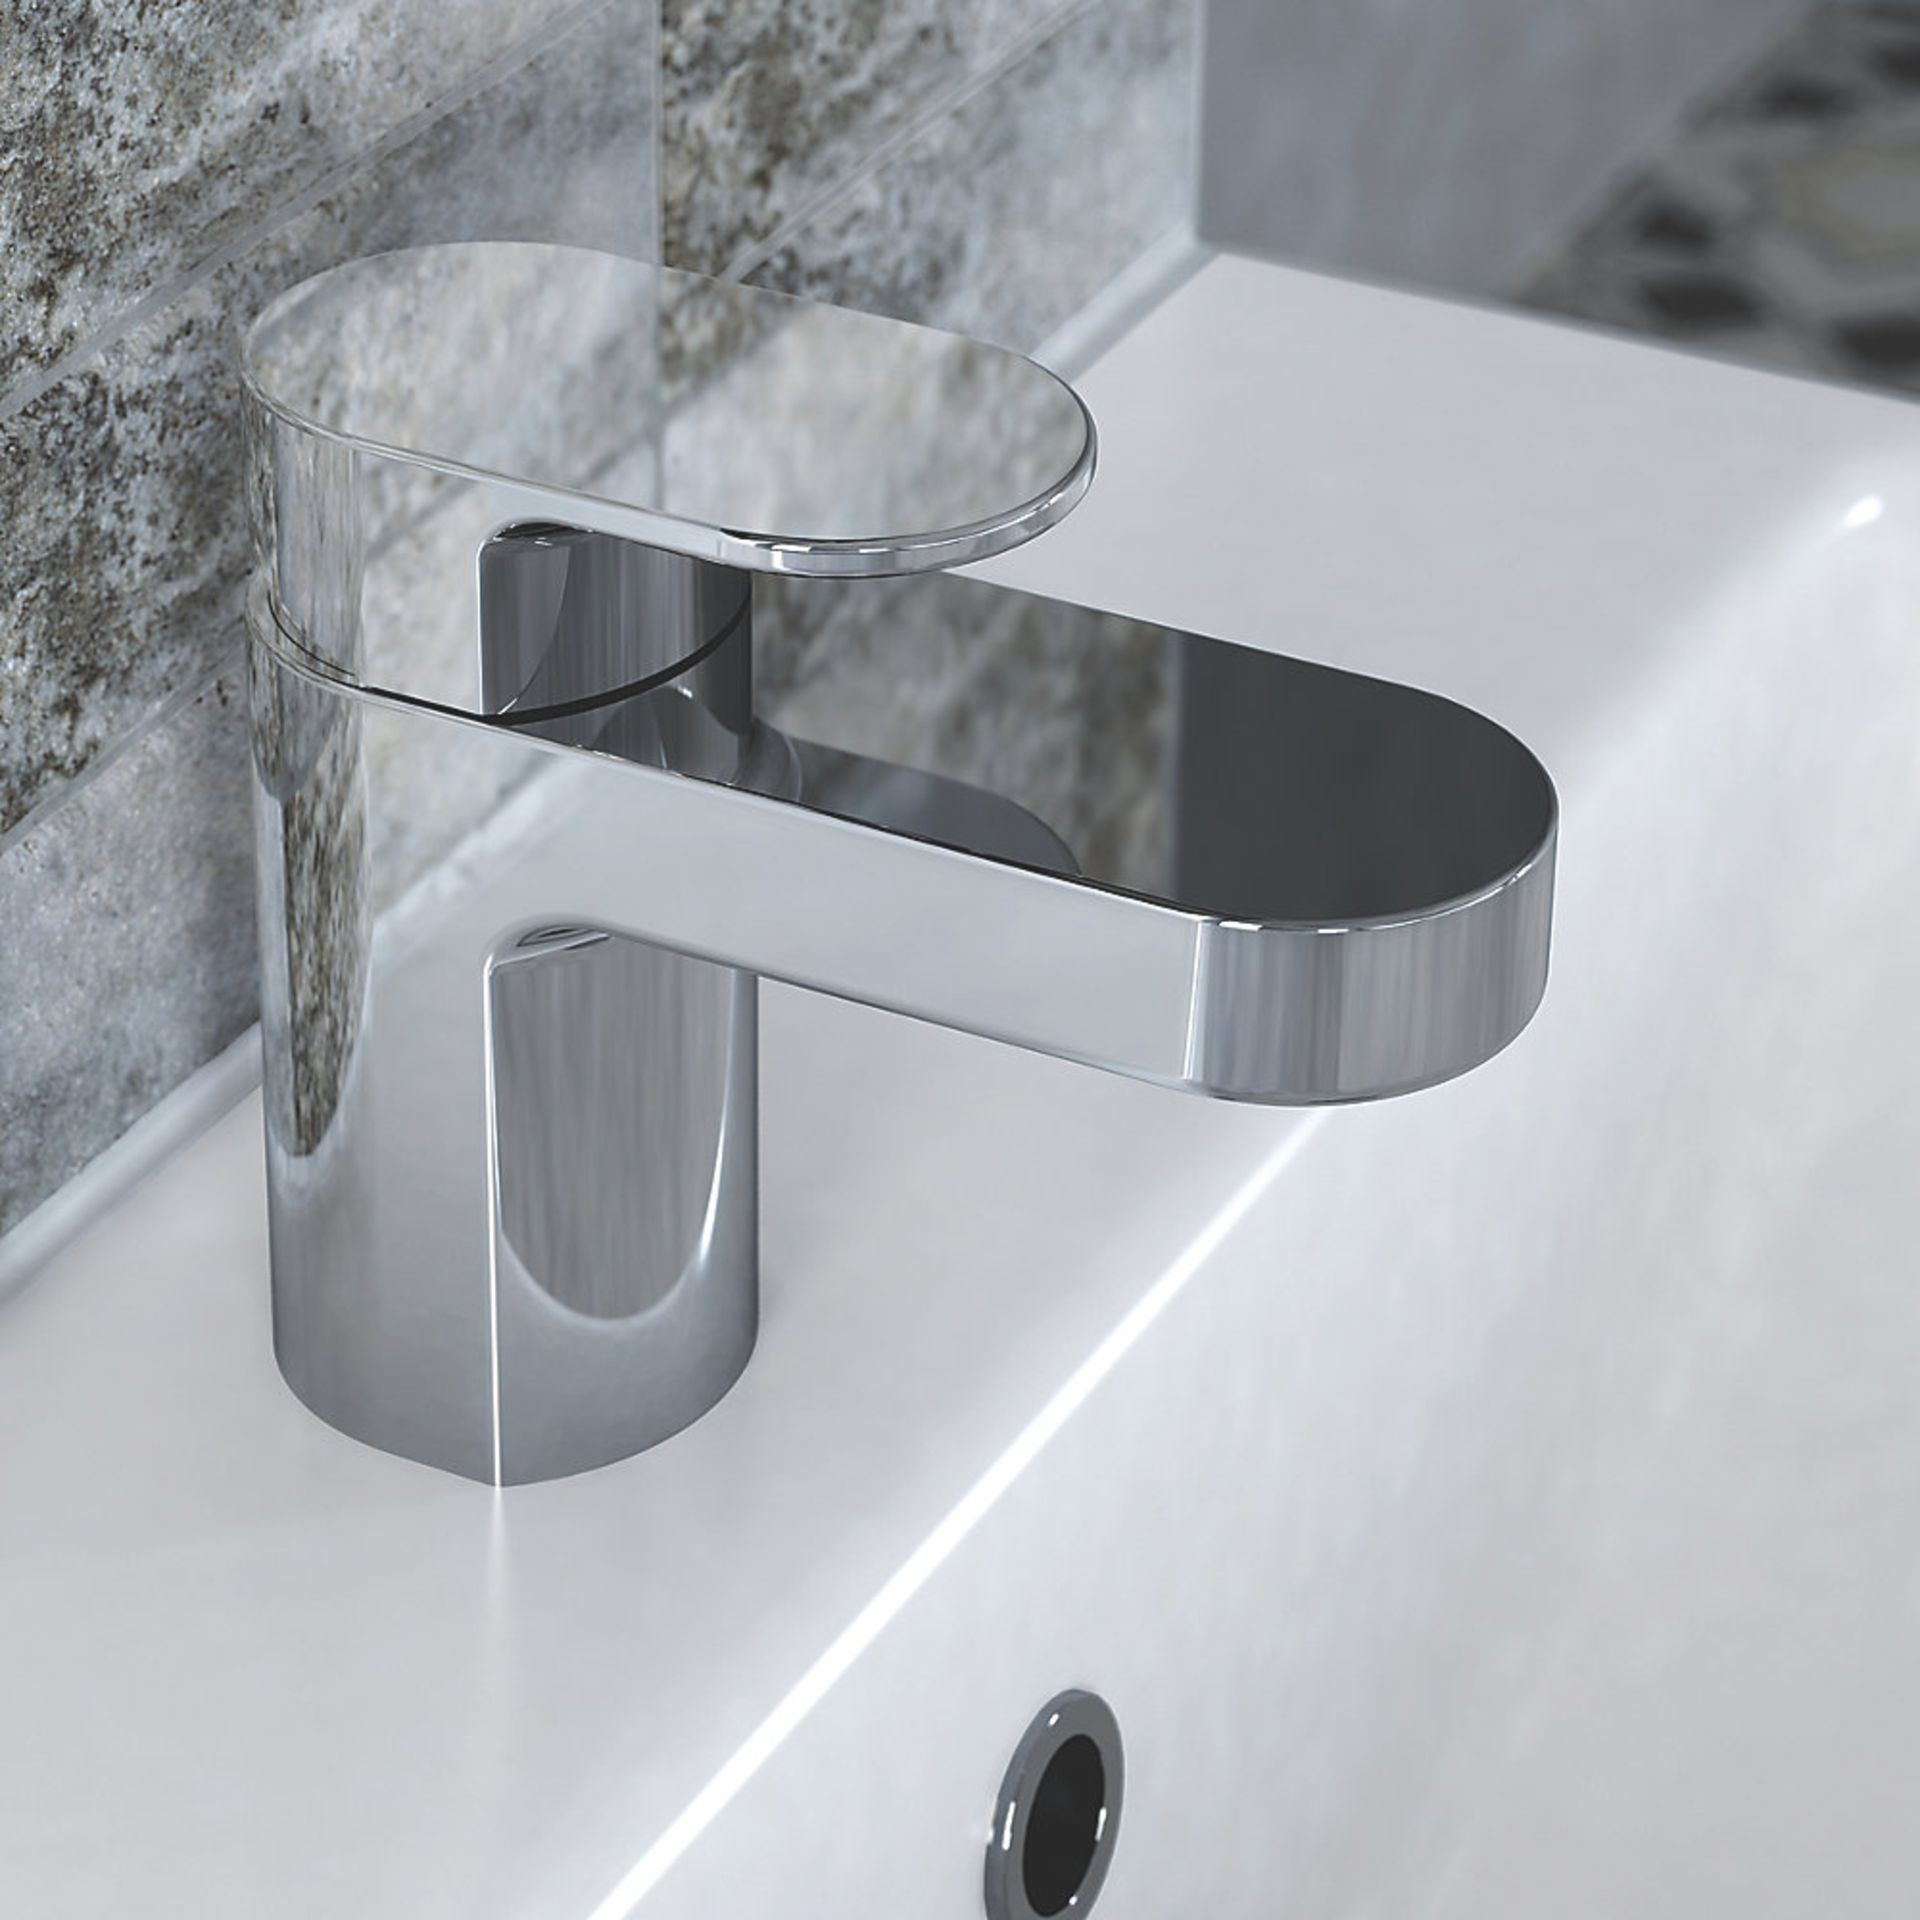 (PP97) Bristan Frenzy Basin Mono Mixer Tap. Chrome-plated brass. Ceramic disc technology ensures - Image 5 of 5